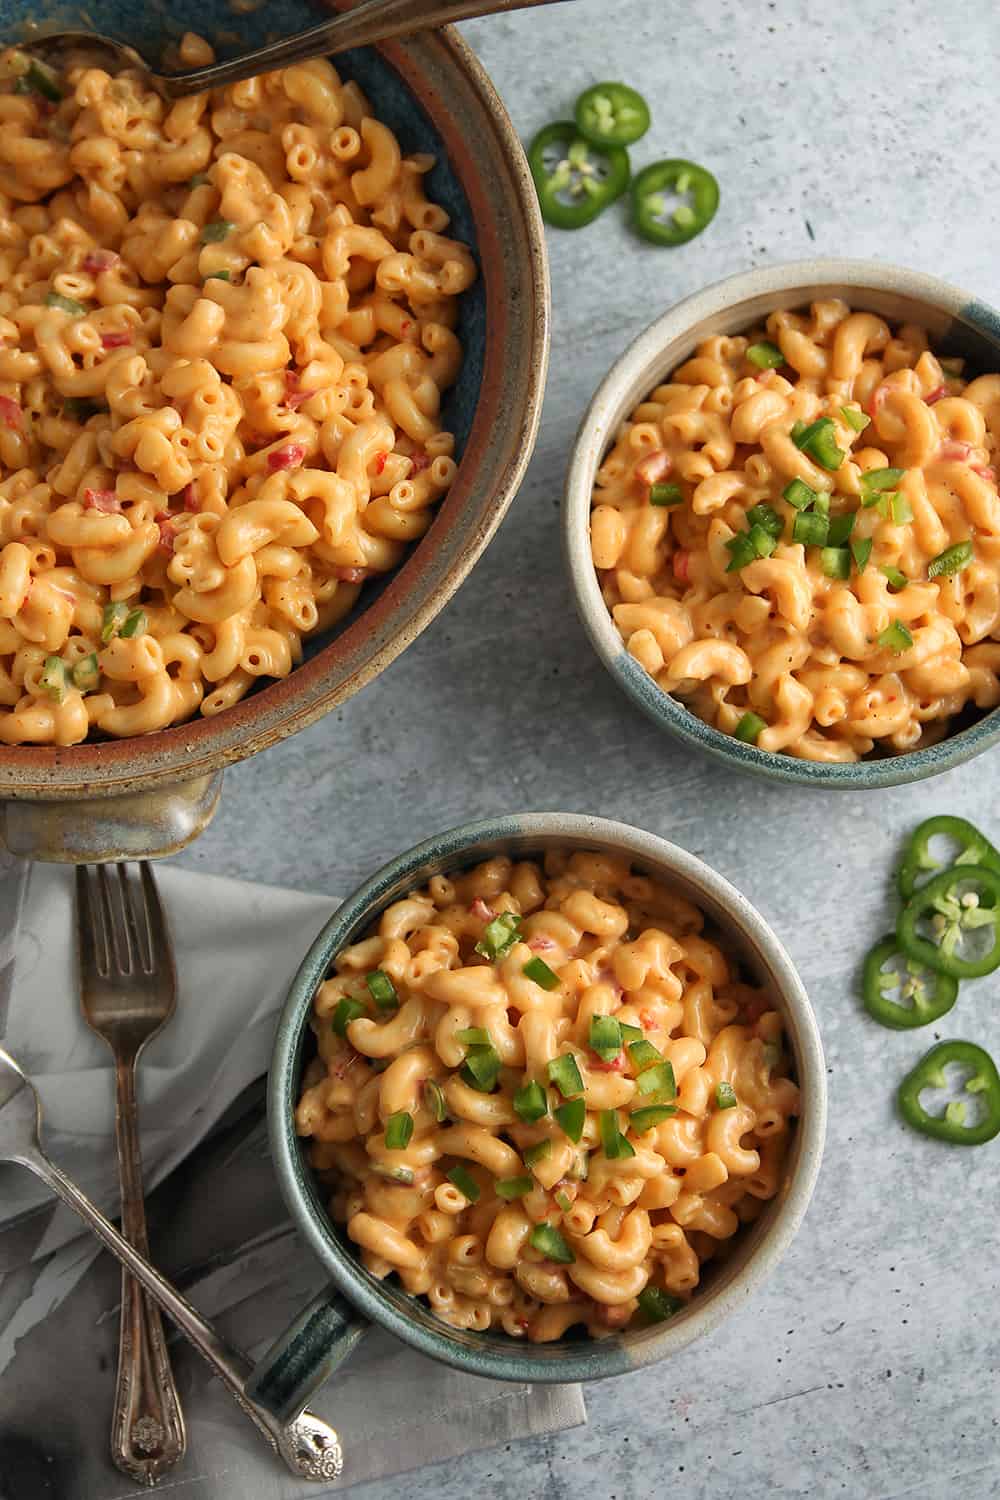 Large bowl of macaroni and pimento cheese alongside two serving bowls, forks and sliced jalapenos